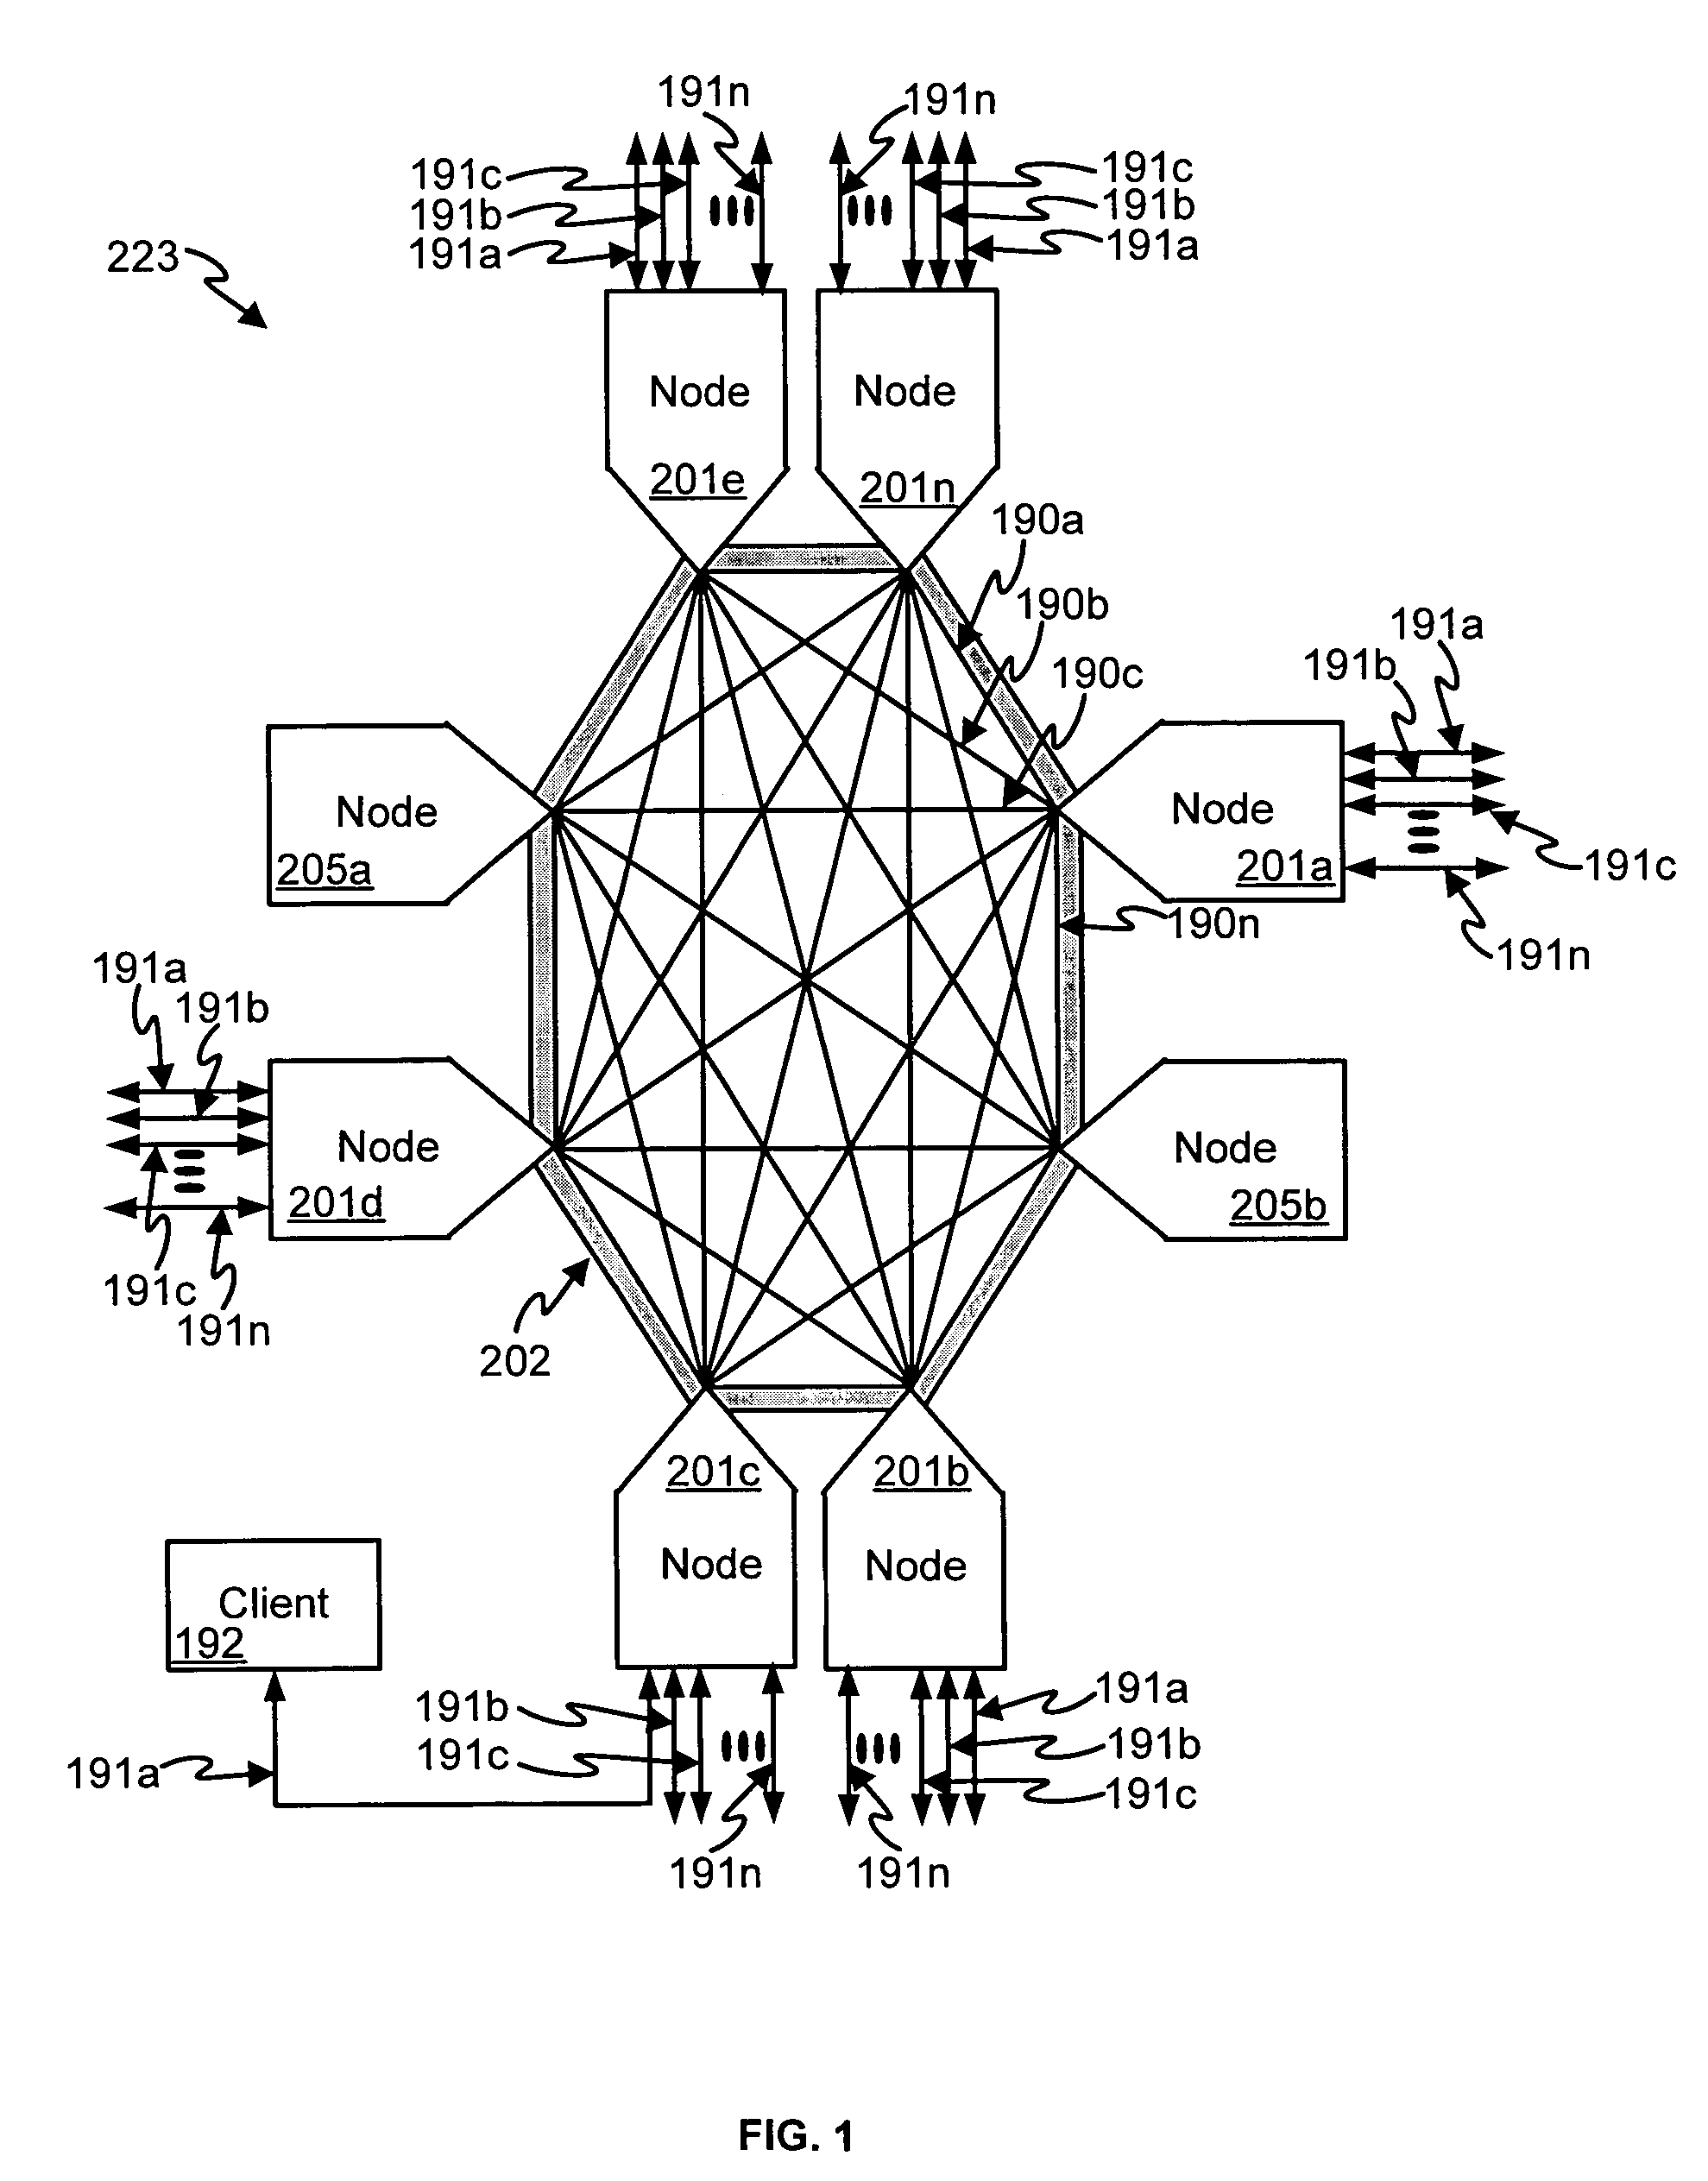 Data access and address translation for retrieval of data amongst multiple interconnected access nodes